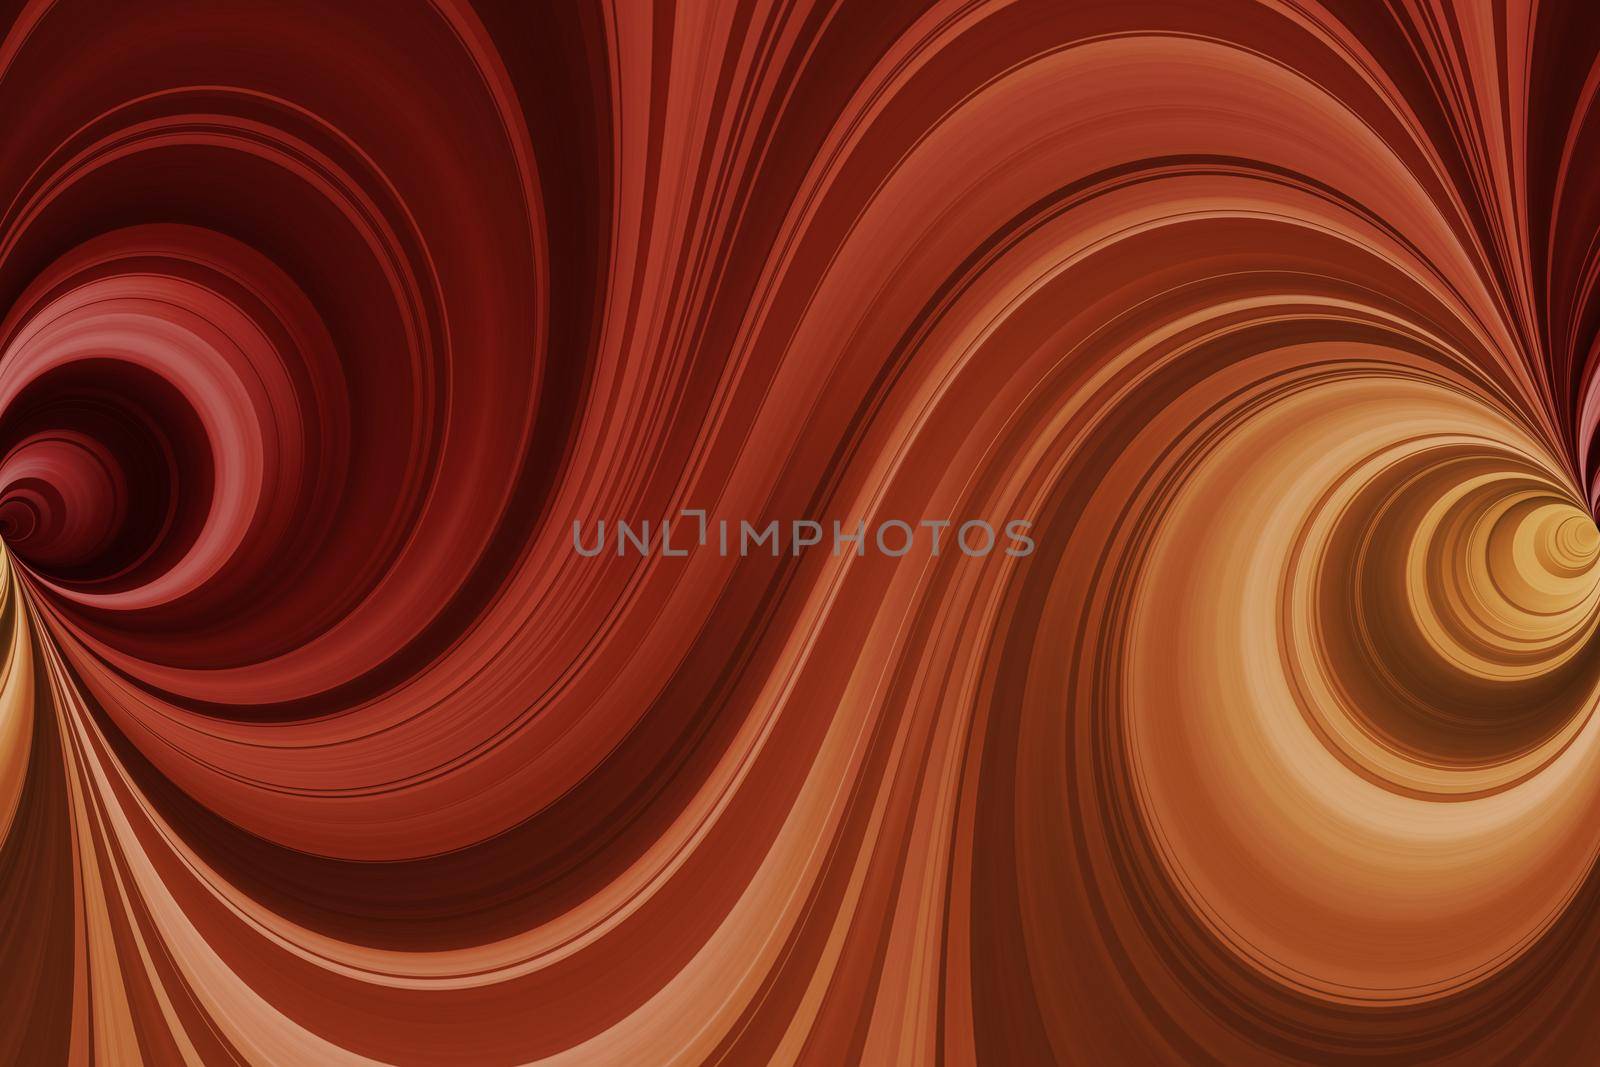 Red, orange and yellow spiral lines, abstract fantasy background, seamless pattern